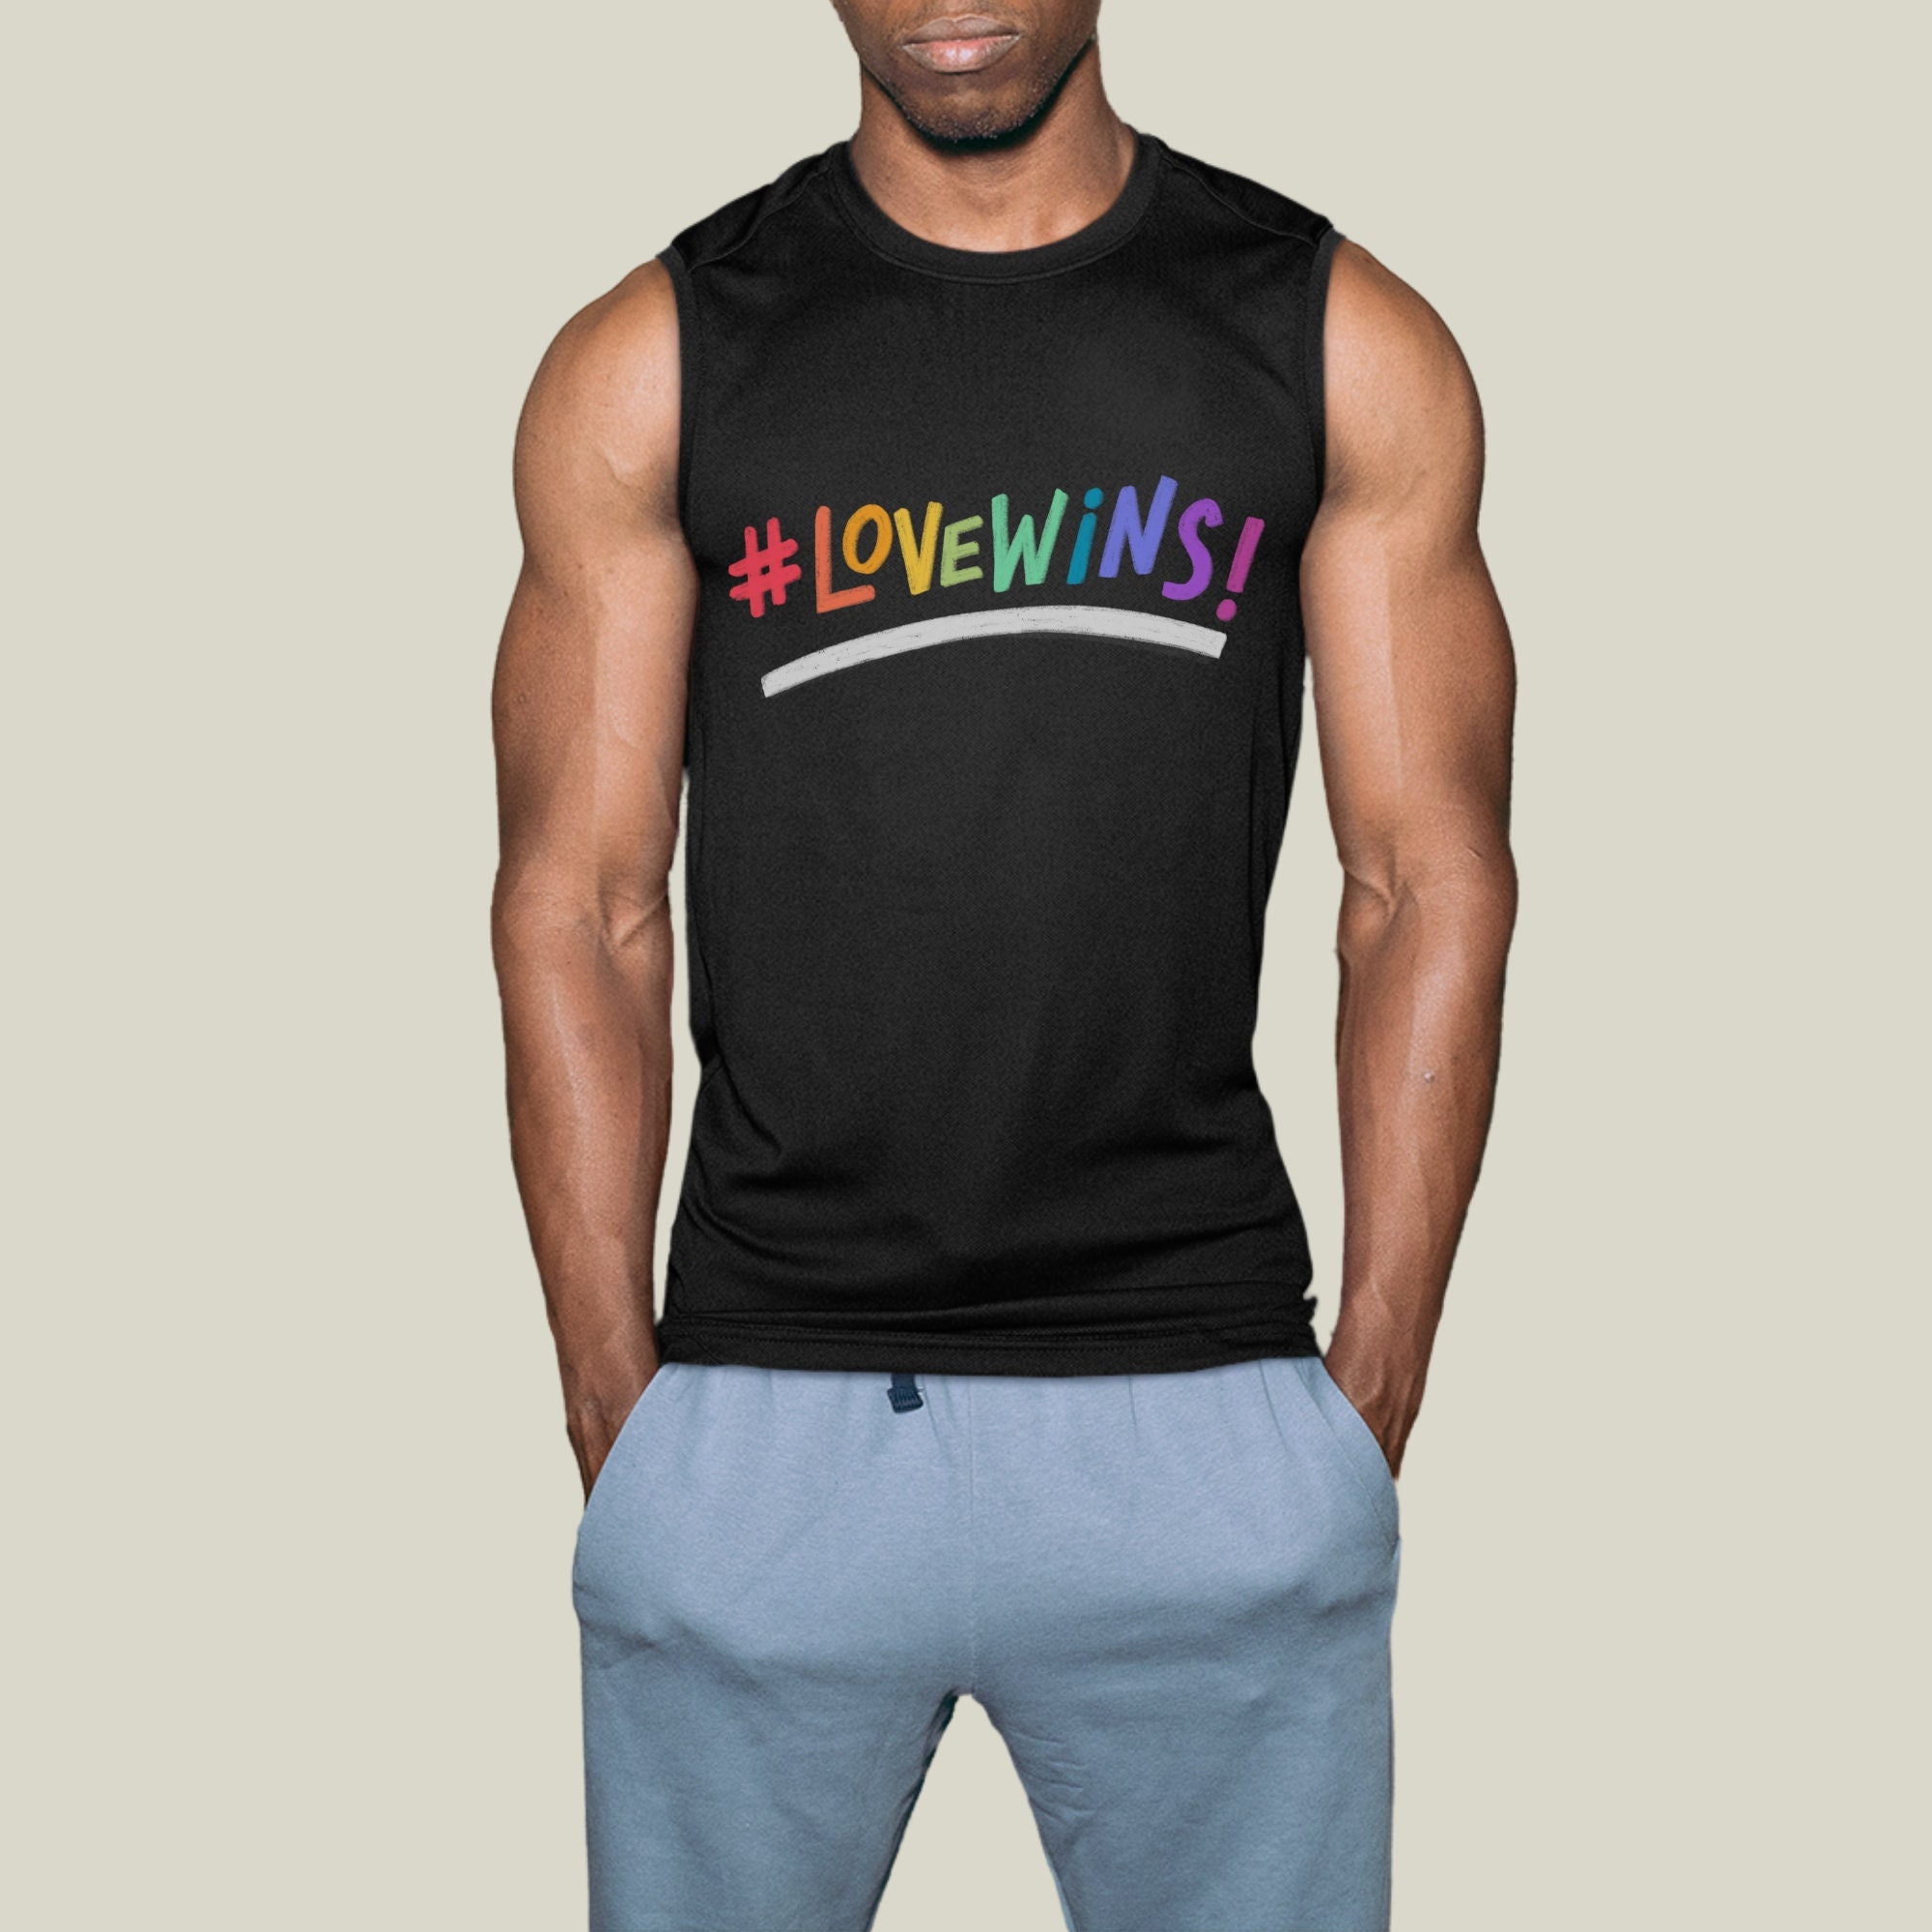 Festivals and Summer Mens Cut Wild and Fun Tank Tops for Pride 